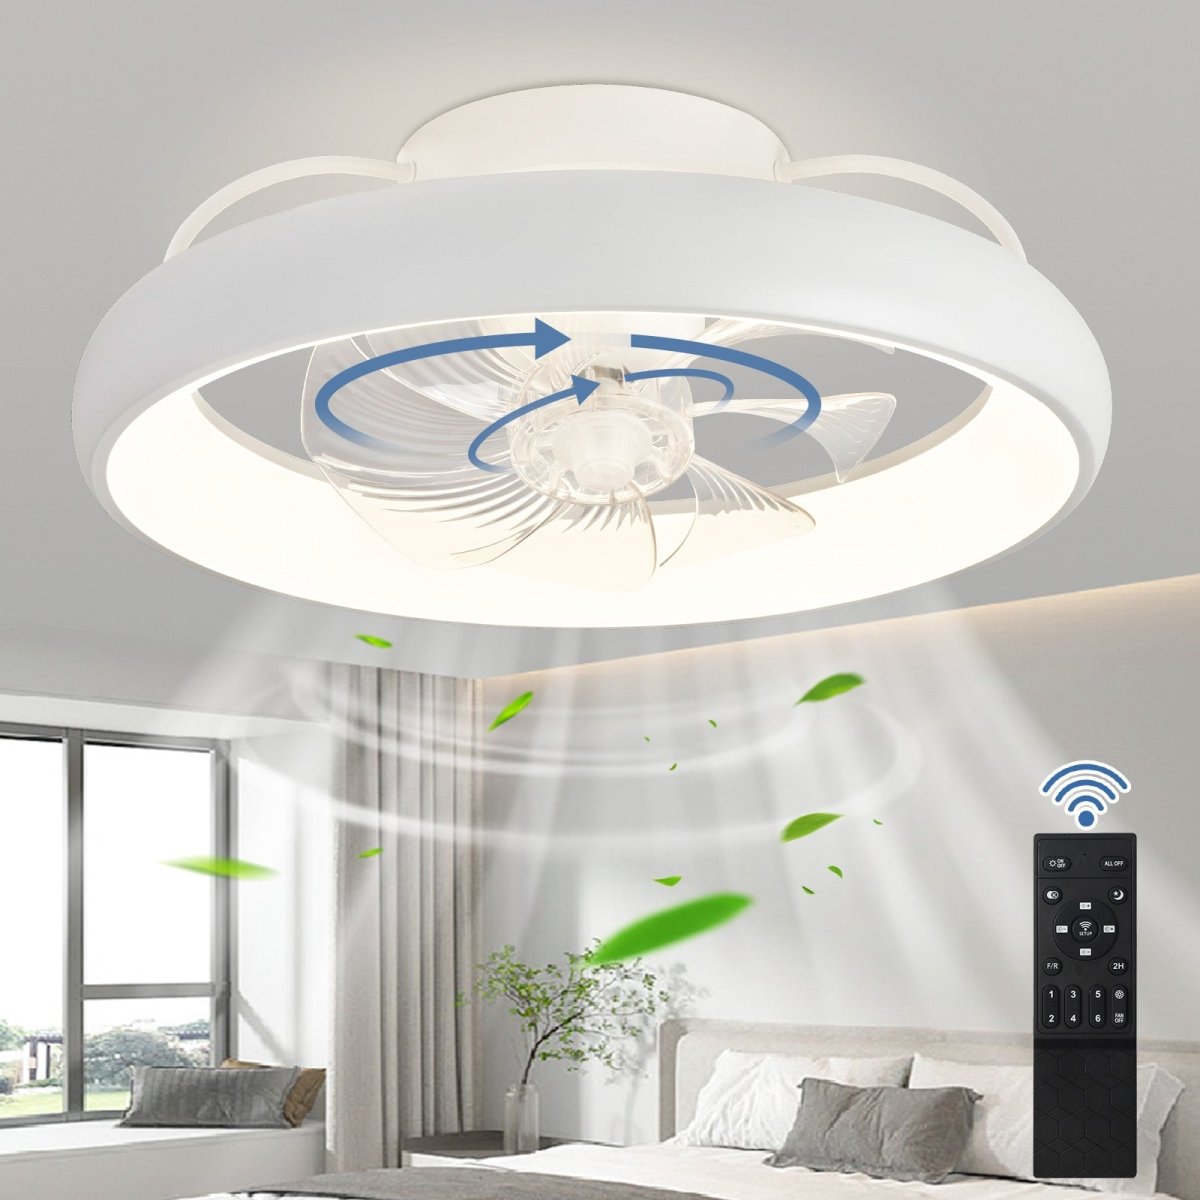 DLLT 360-Degree Rotation LED Flush Mount Ceiling Fan, Modern Low Profile Ceiling Fan with Lights and Remote, Dimmable Reversible Timing, 3CCT Adjustable for Kitchen Bedroom Living Room, White,20 in - WS-FPZ51-33C-WH 1 | DEPULEY